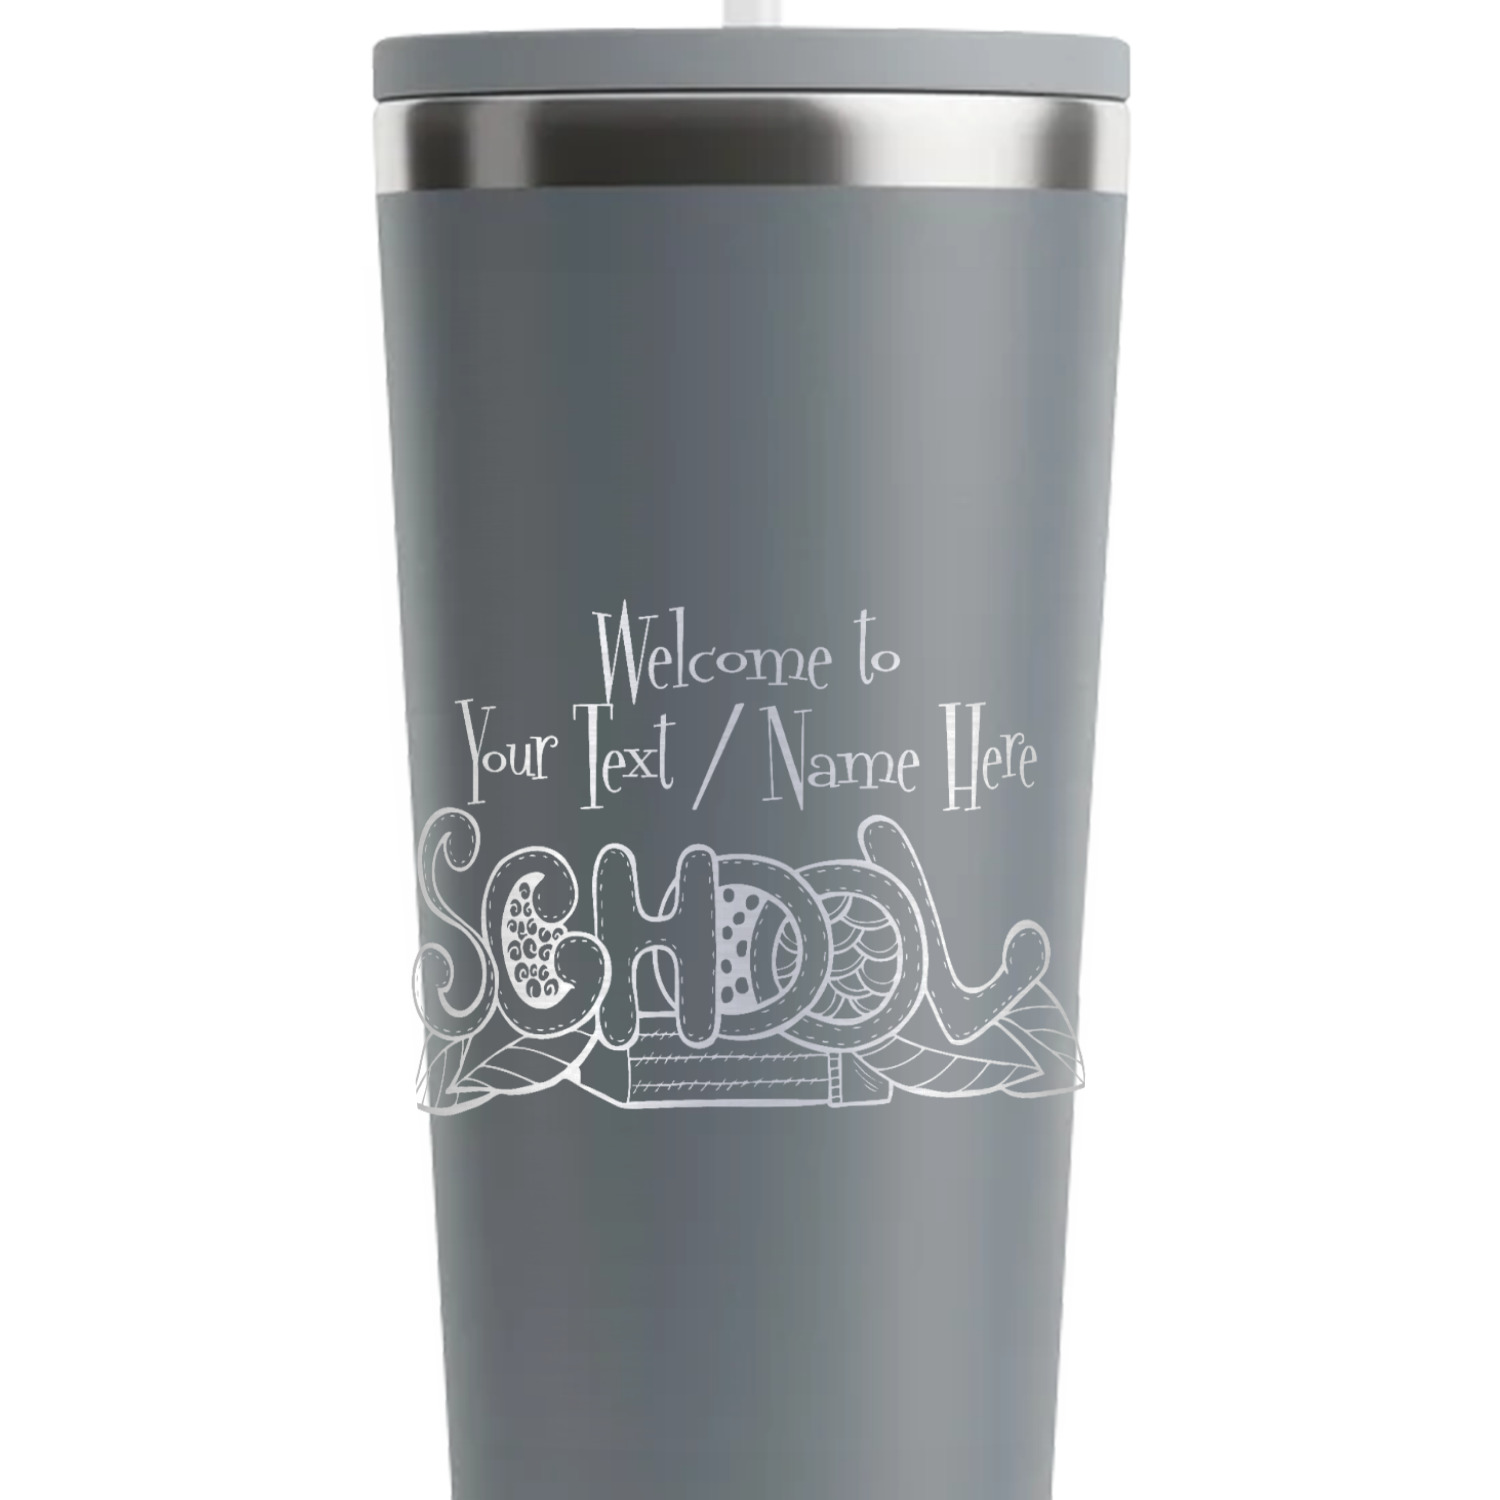 https://www.youcustomizeit.com/common/MAKE/2463811/Welcome-to-School-Grey-RTIC-Everyday-Tumbler-28-oz-Close-Up.jpg?lm=1698263072